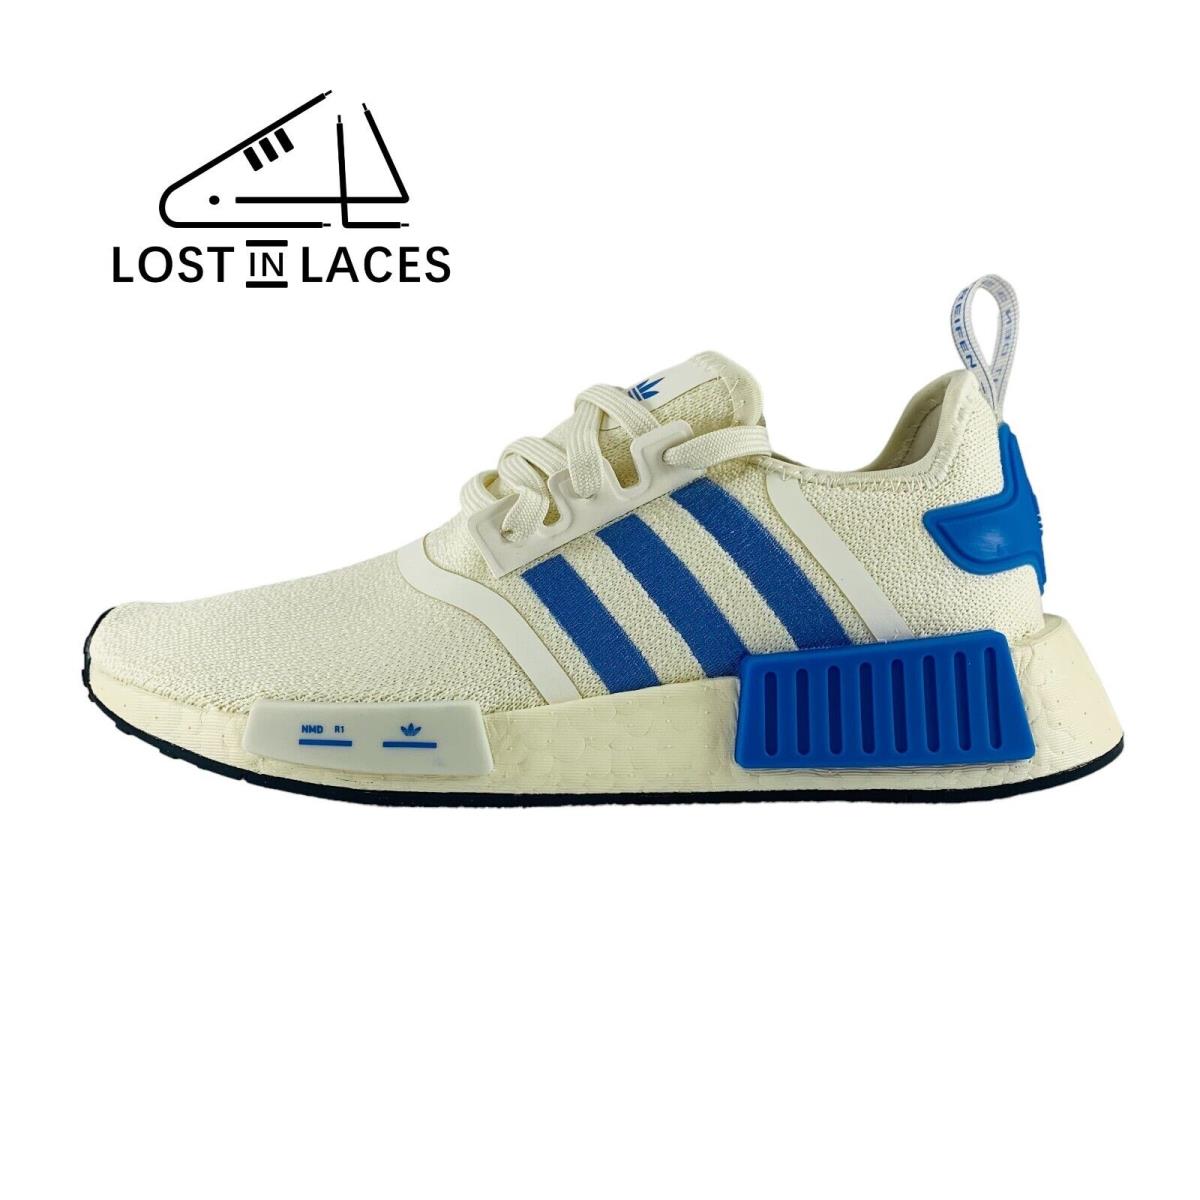 Adidas NMD_R1 White Halo Blue Sneakers Lifestyle Shoes HP2823 Women`s - White